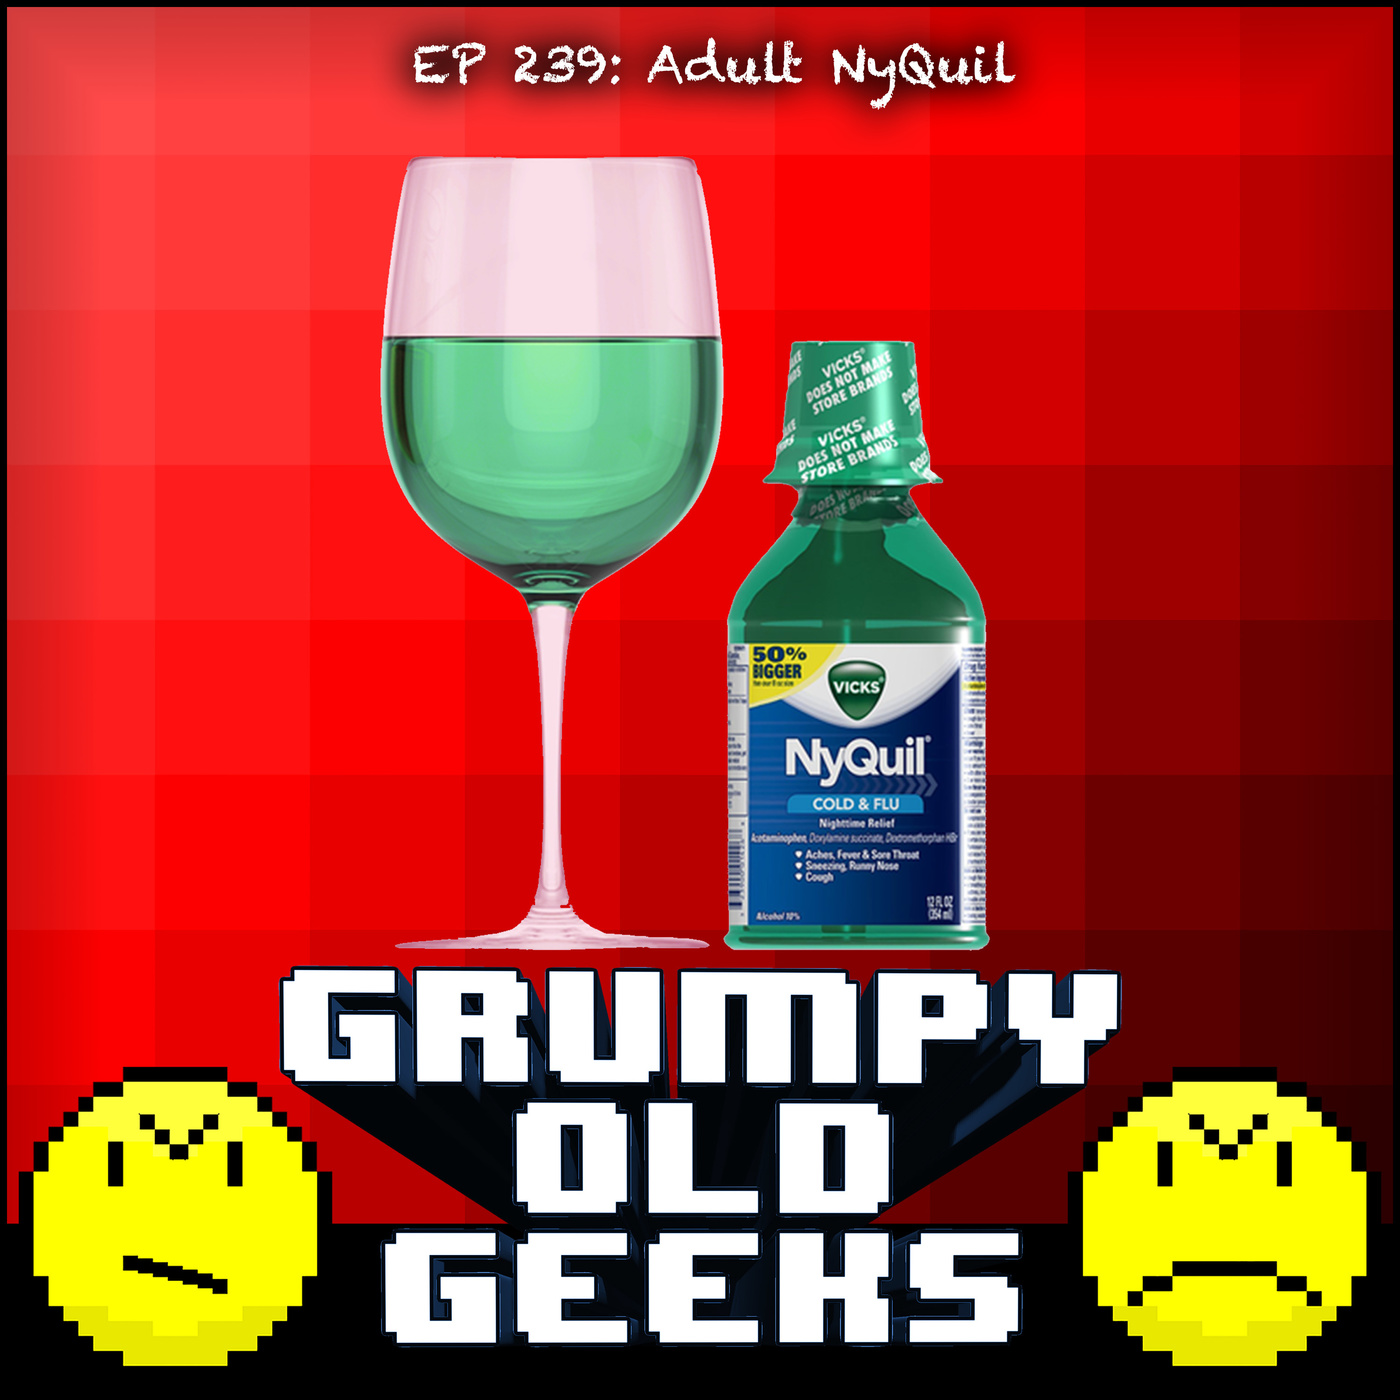 239: Adult Nyquil Image